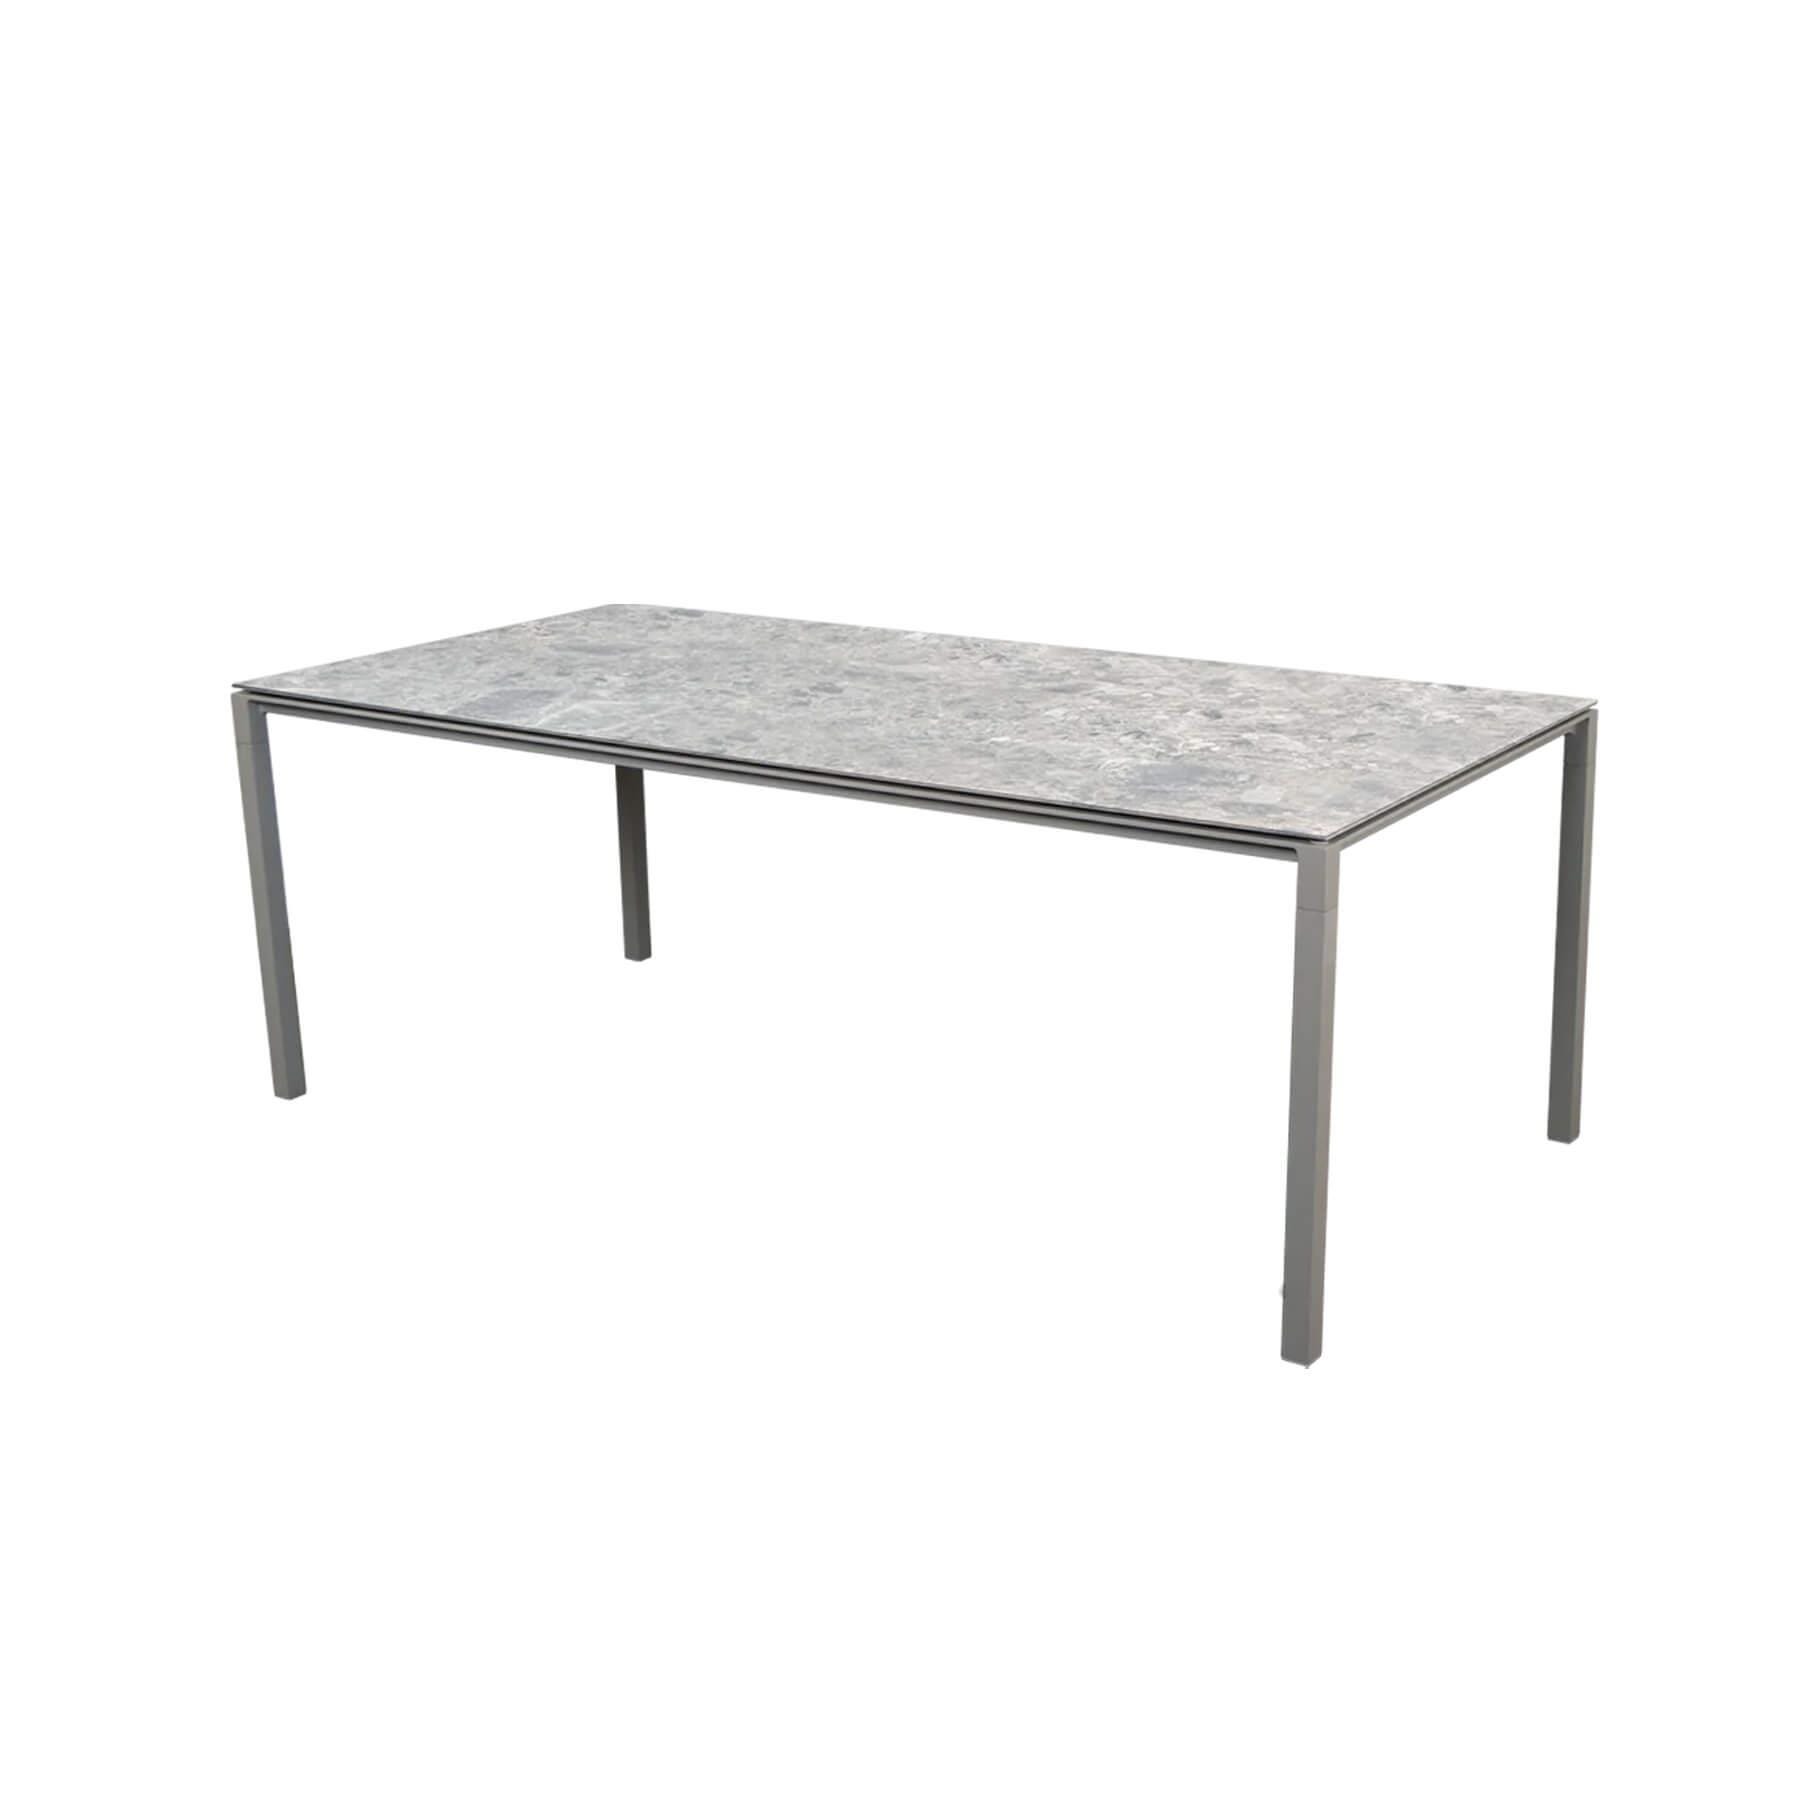 Caneline Pure Outdoor Dining Table Large Ceramic Multi Colour Top Taupe Legs